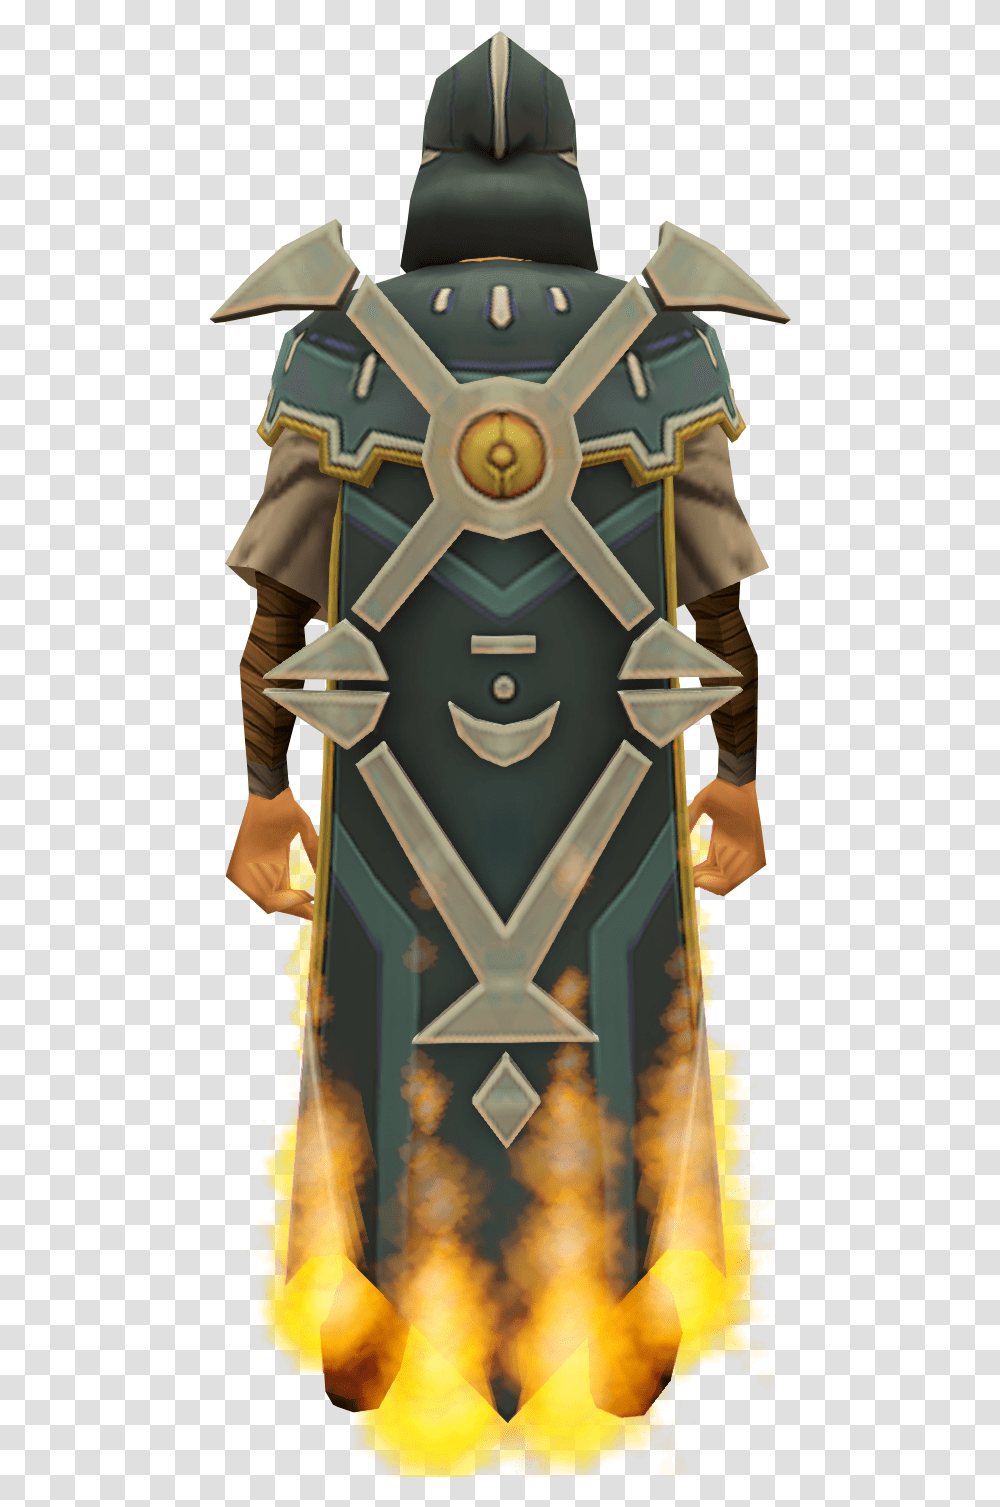 The Runescape Wiki Trophy, Armor, Apparel, Toy Transparent Png